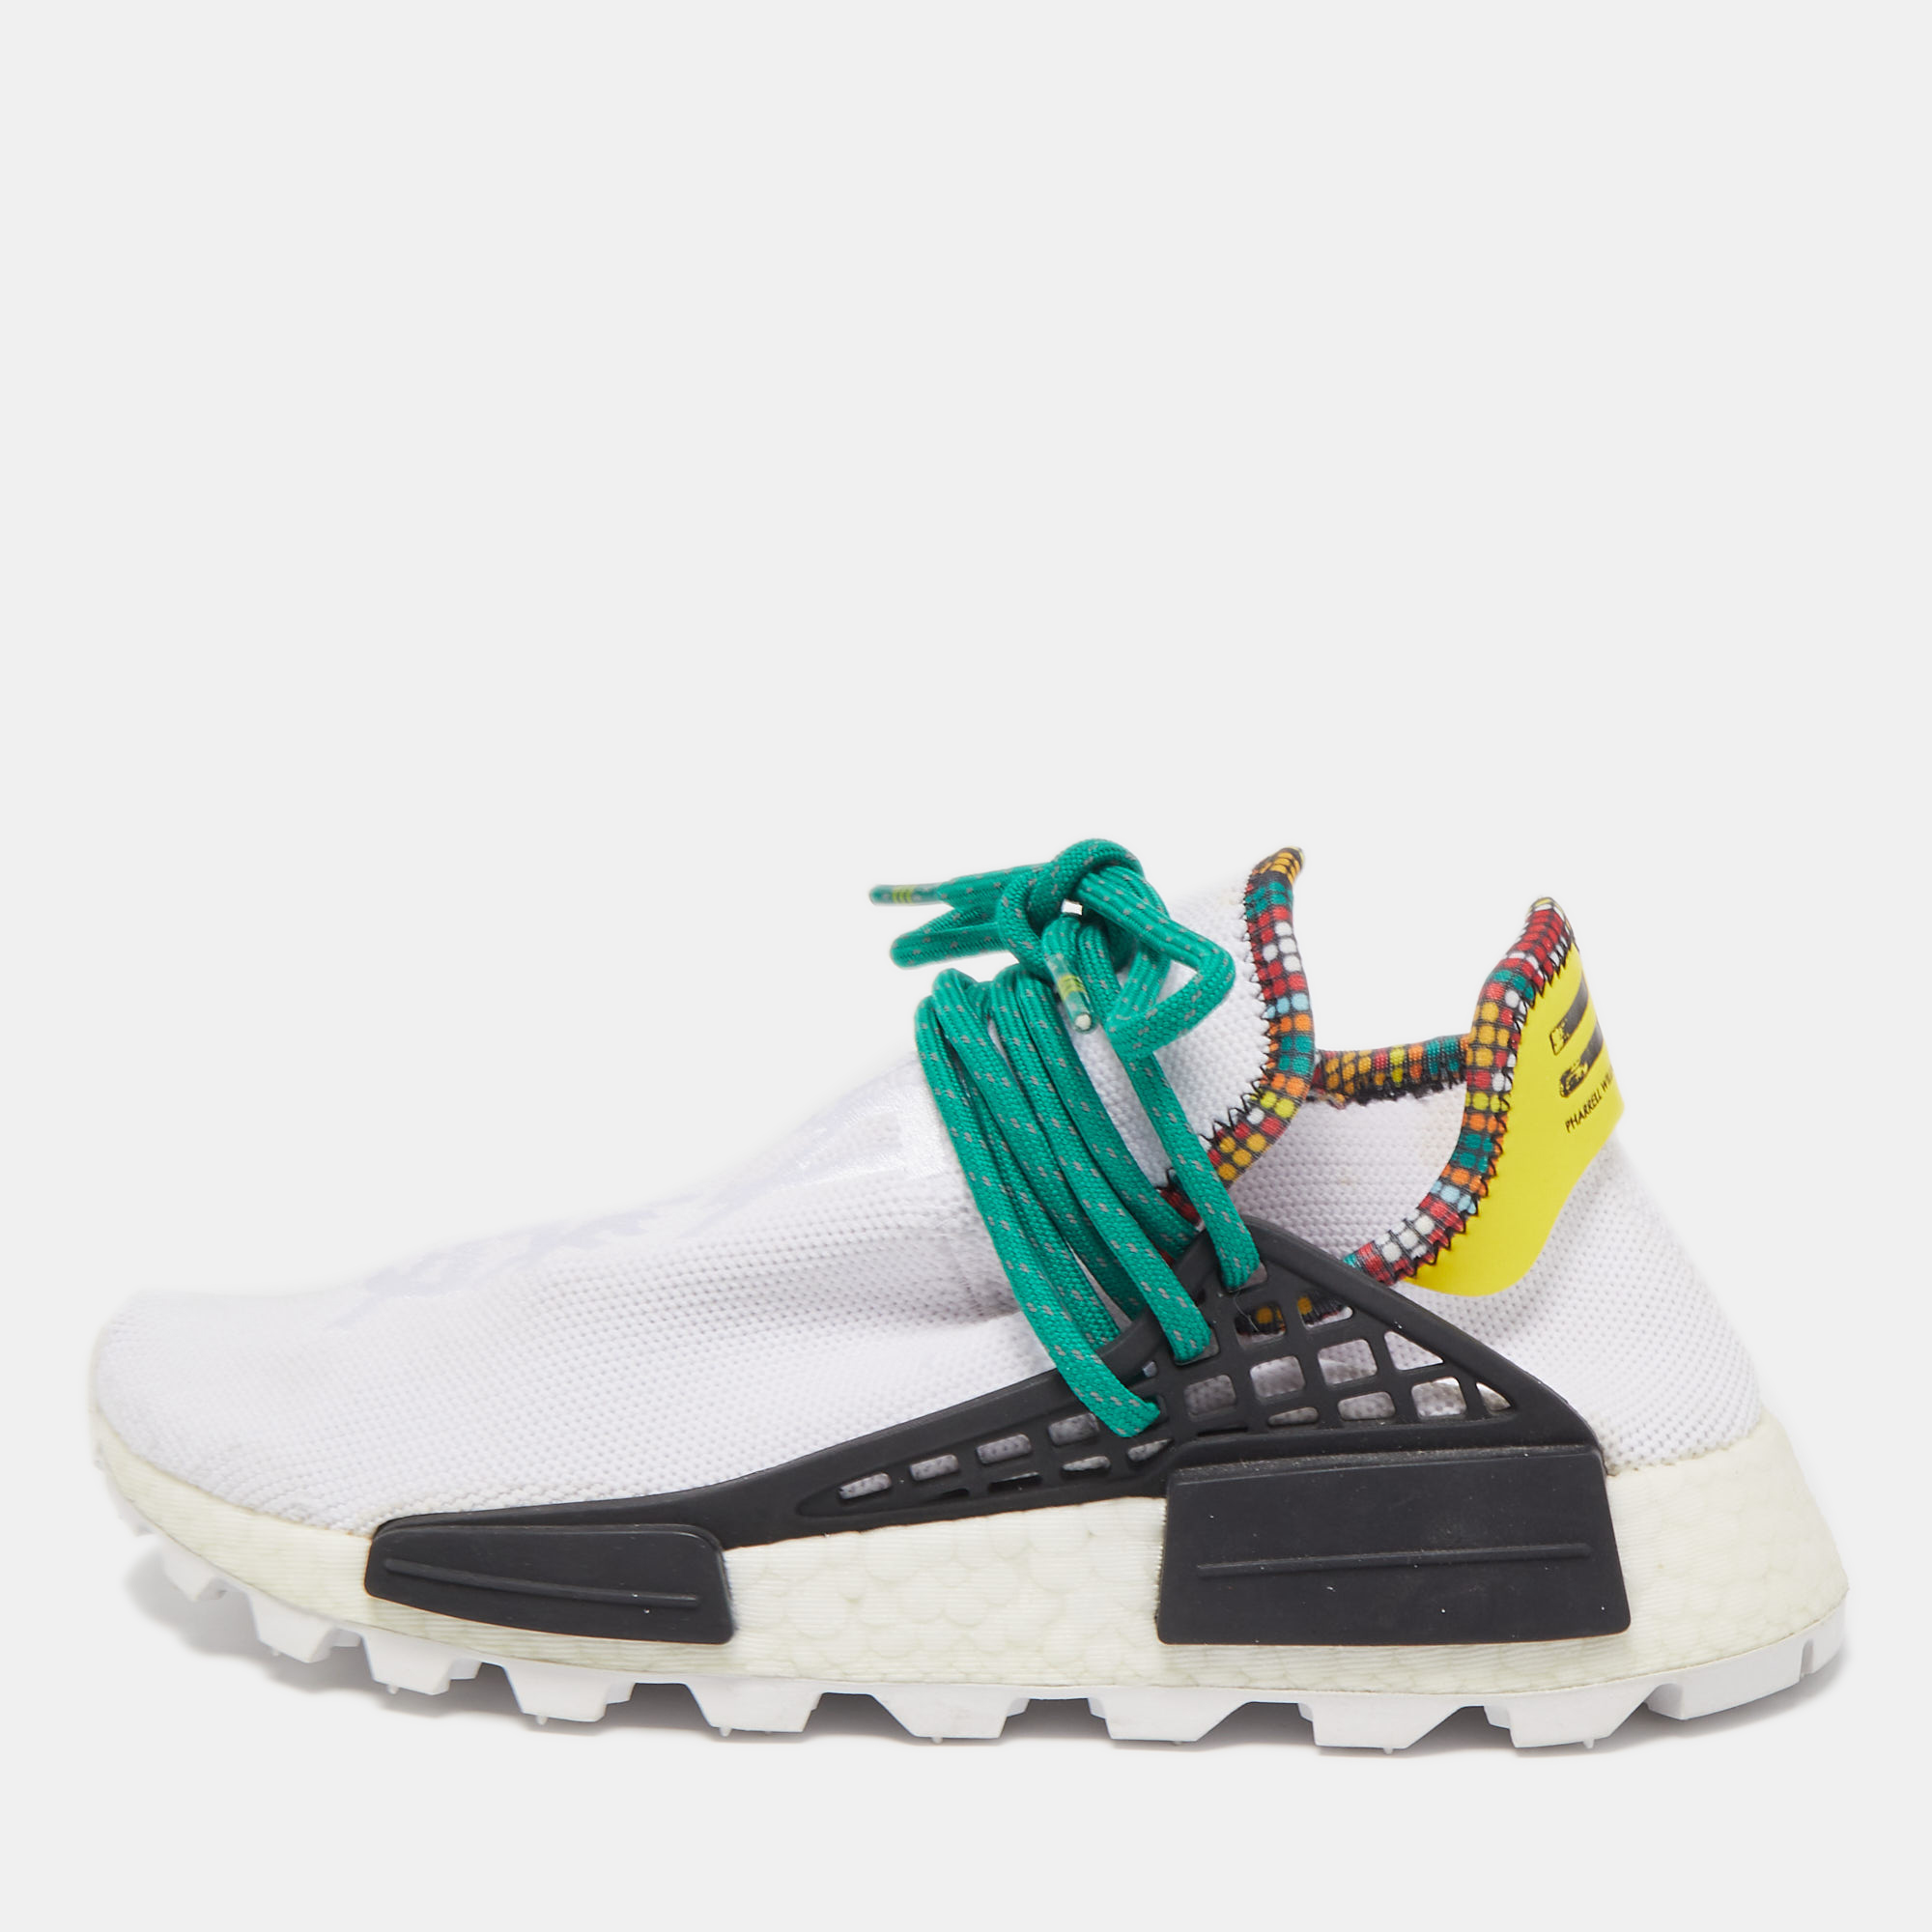 Pre-owned Adidas Originals Pharrell Williams X Adidas White Fabric Human Body Nmd Sneakers Size 37 1/3